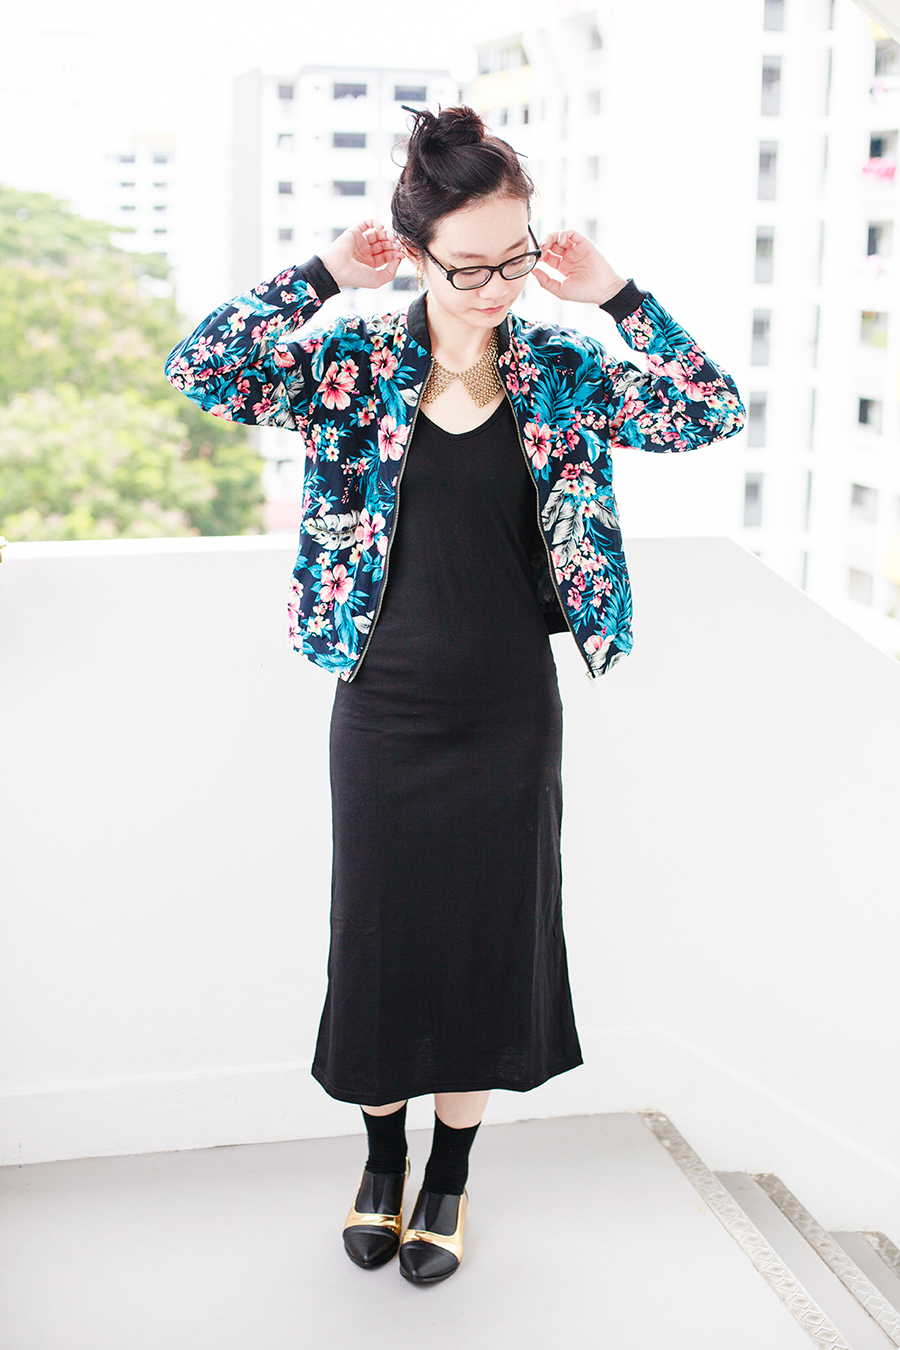 Day to night outfit: Newdress blue floral jacket, Newdress v-neck strappy black dress, Forever 21 gold chain collar necklace, Gap black frame glasses, Taobao black crew socks, Something Borrowed Dual-Toned black and gold Pointed Flats via Zalora.